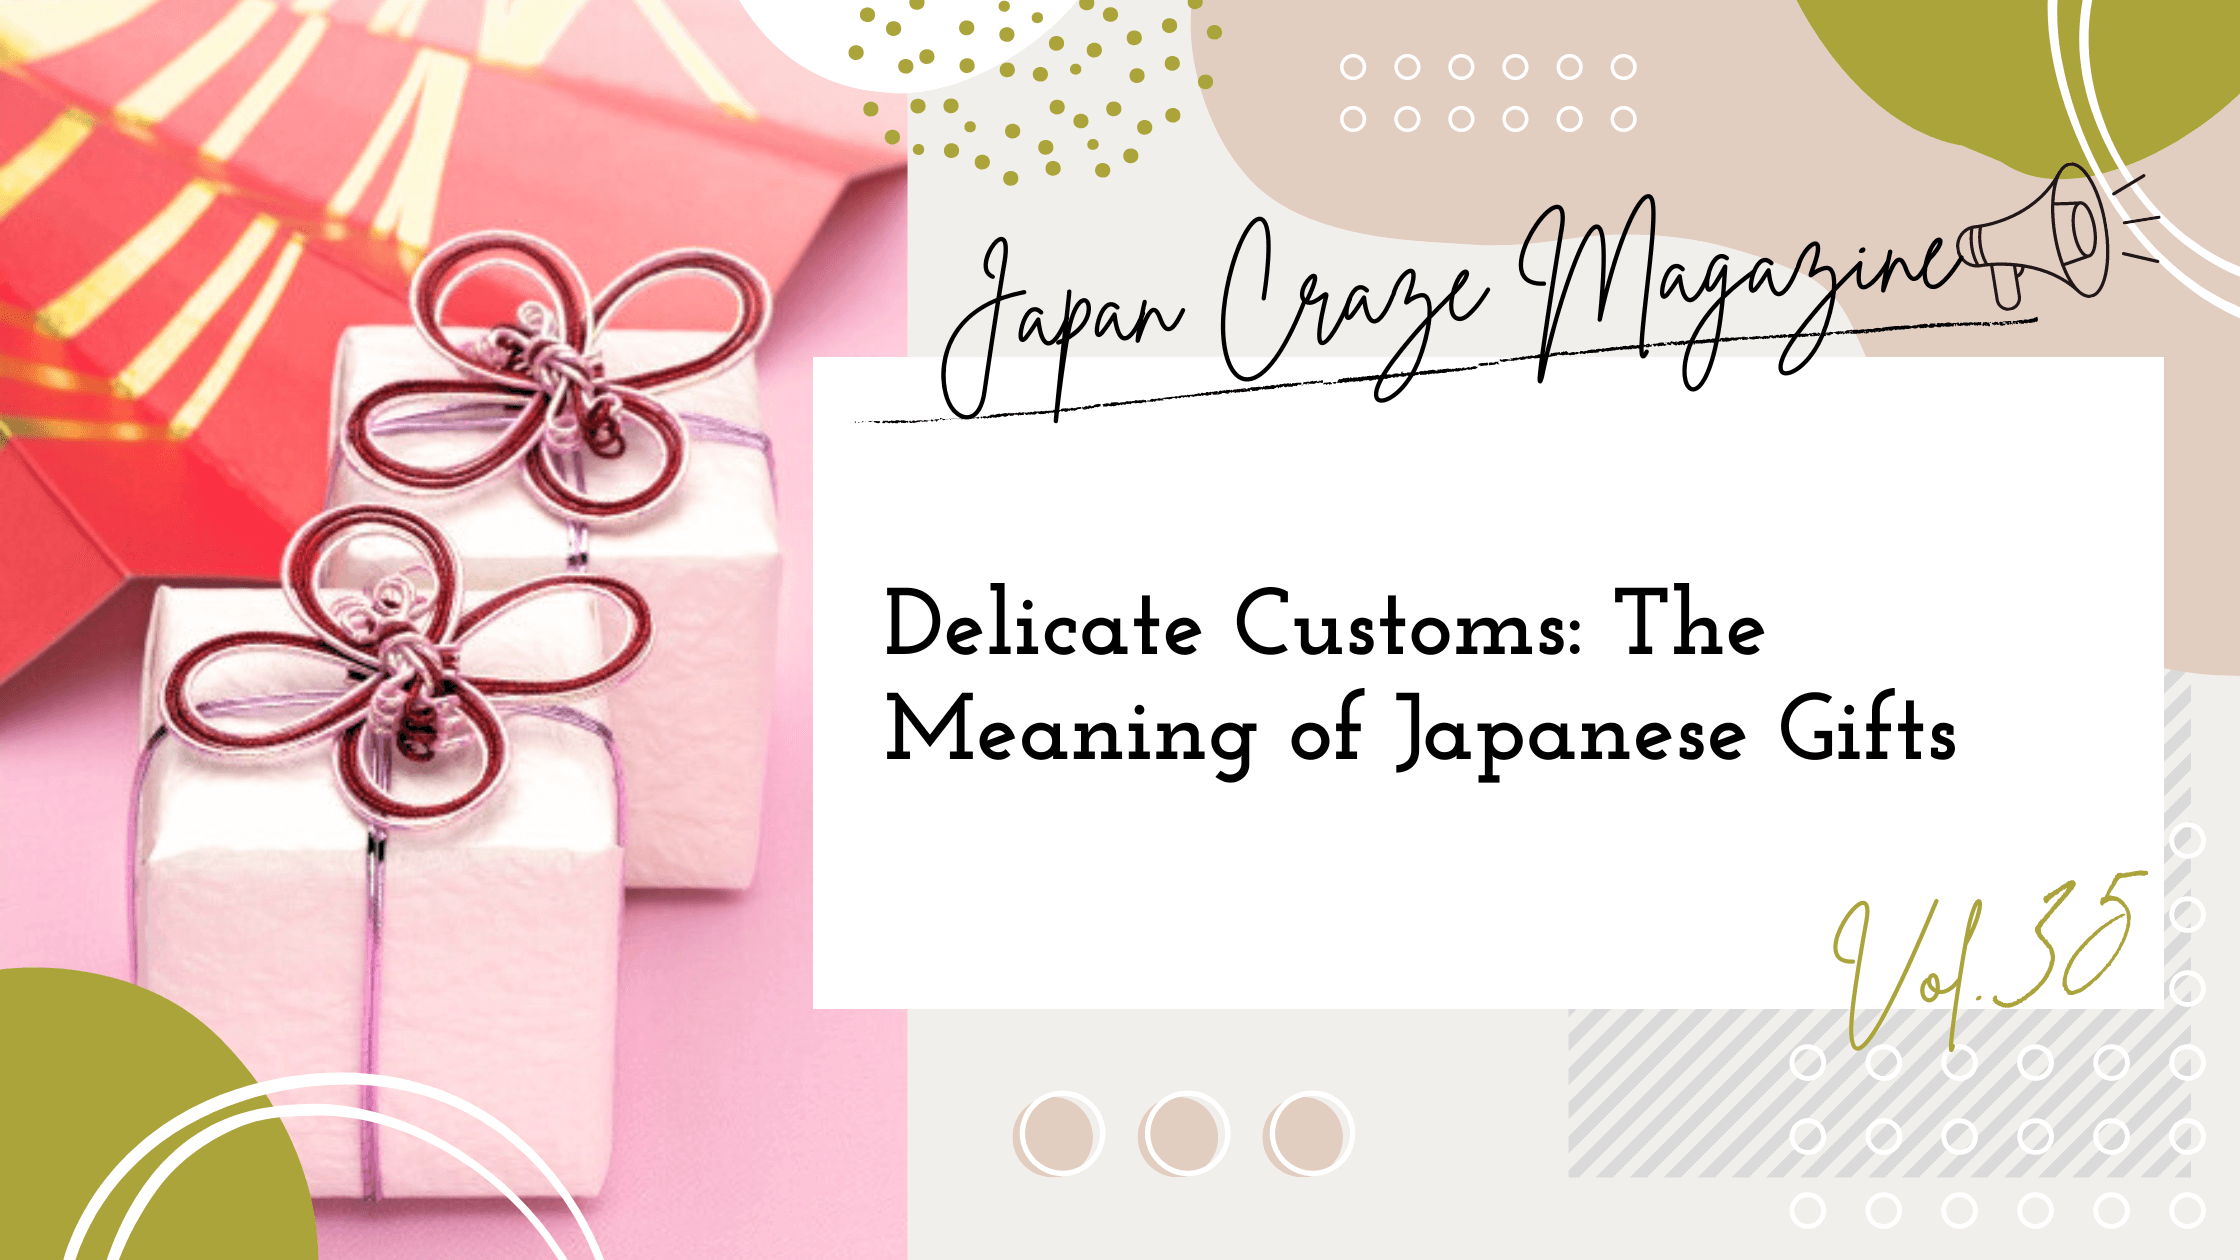 Delicate Customs: The Meaning of Japanese Gifts - JAPAN CRAZE